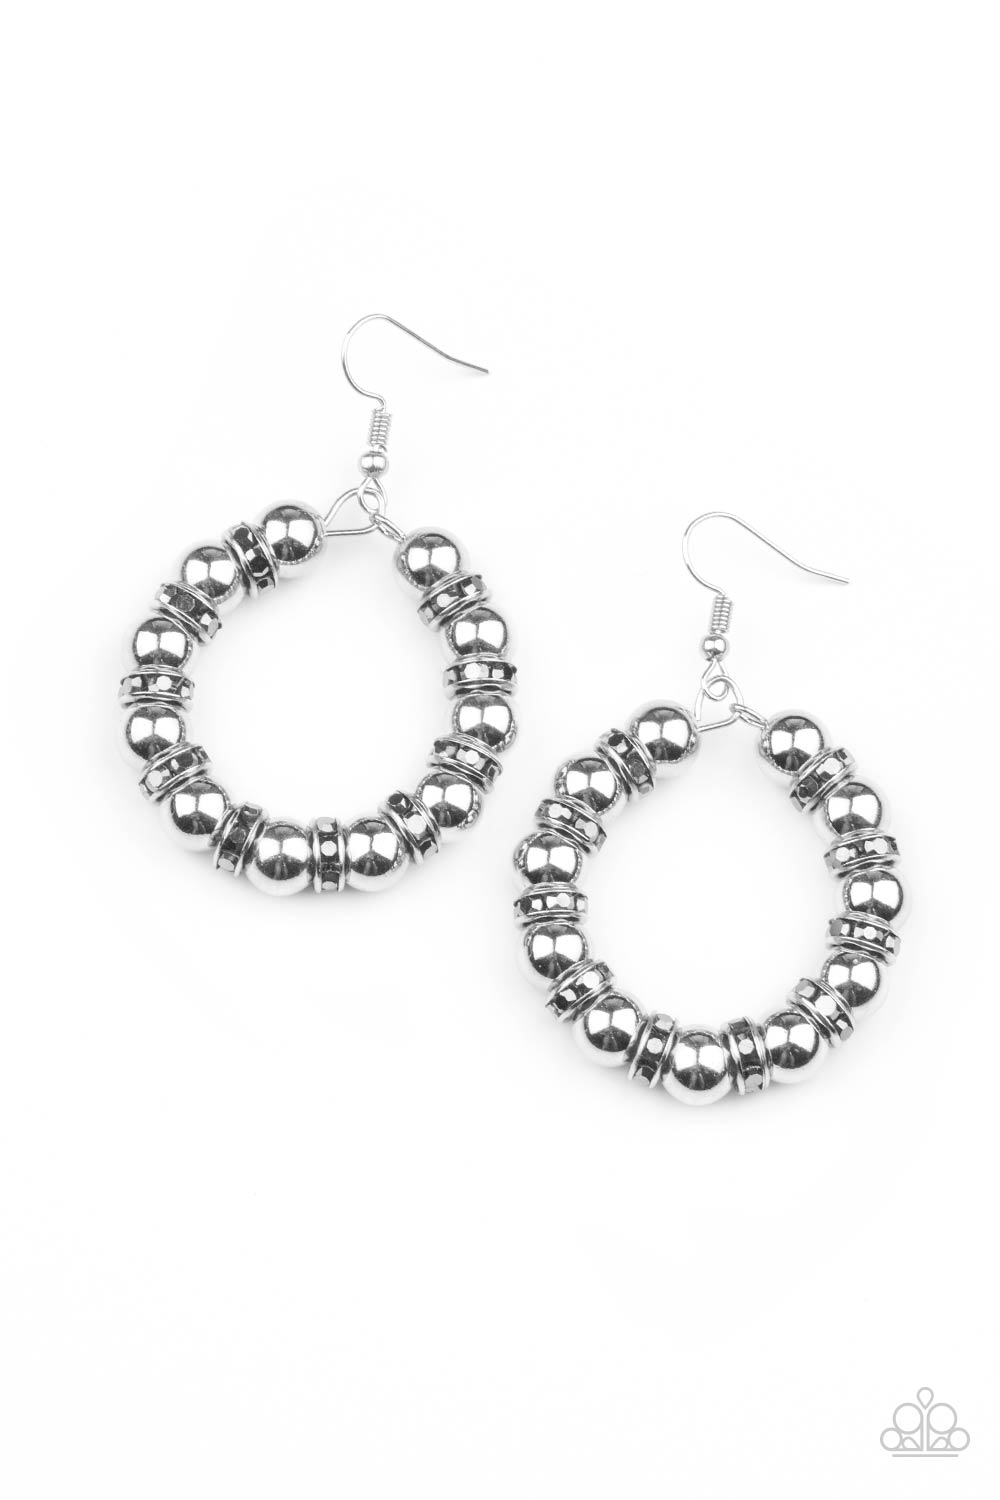 Paparazzi Accessories Cosmic Halo - Silver Fishhook Earrings - Lady T Accessories